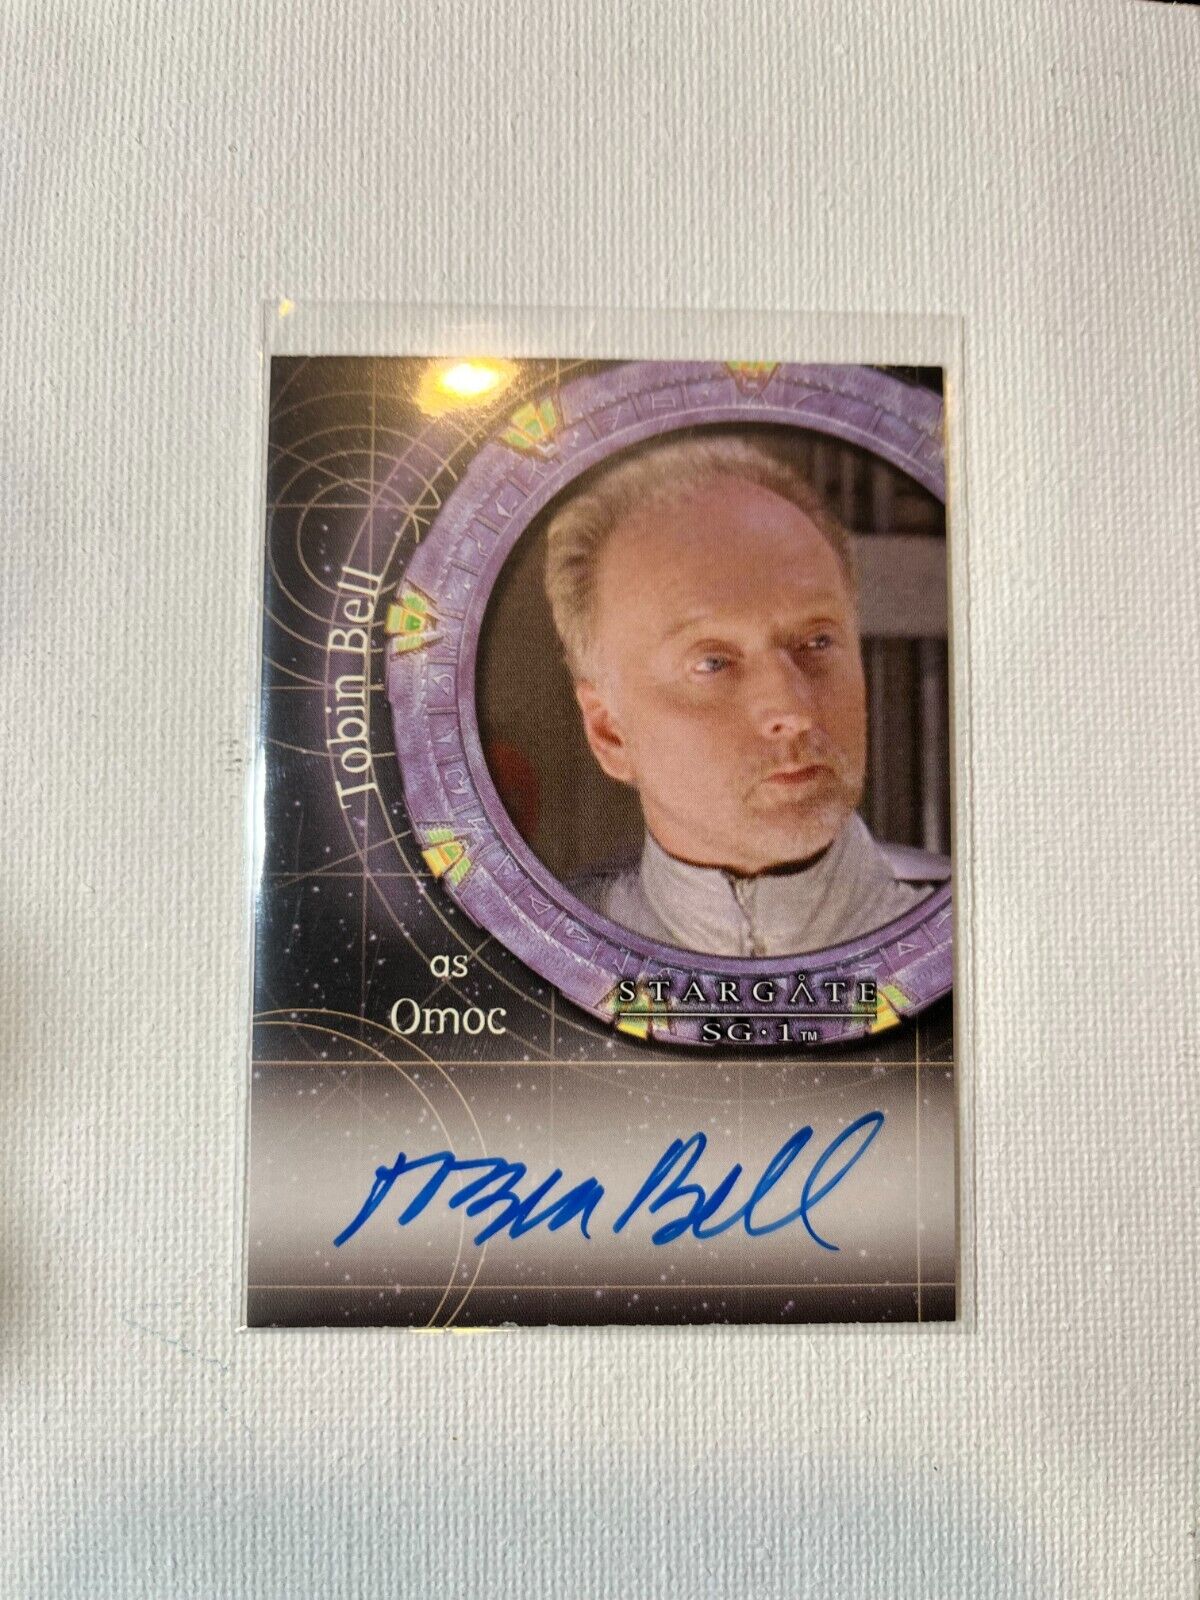 2009 Stargate SG-1 Heroes Auto - Various (Willard, Baccarin) New lower Price